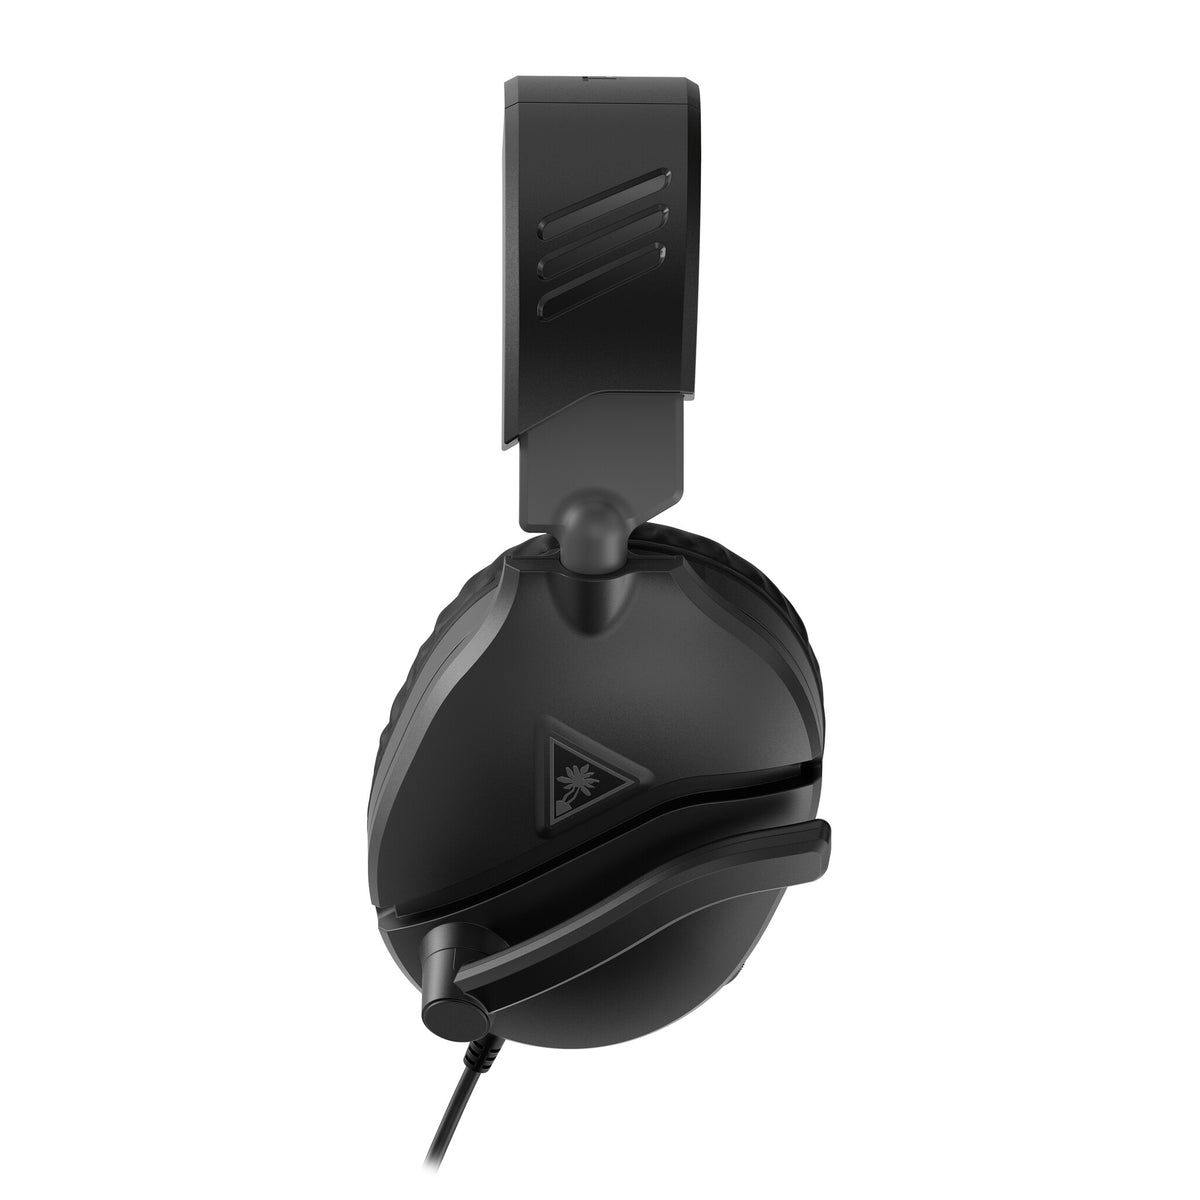 Turtle Beach Recon 70 - Wired Gaming Headset in Black